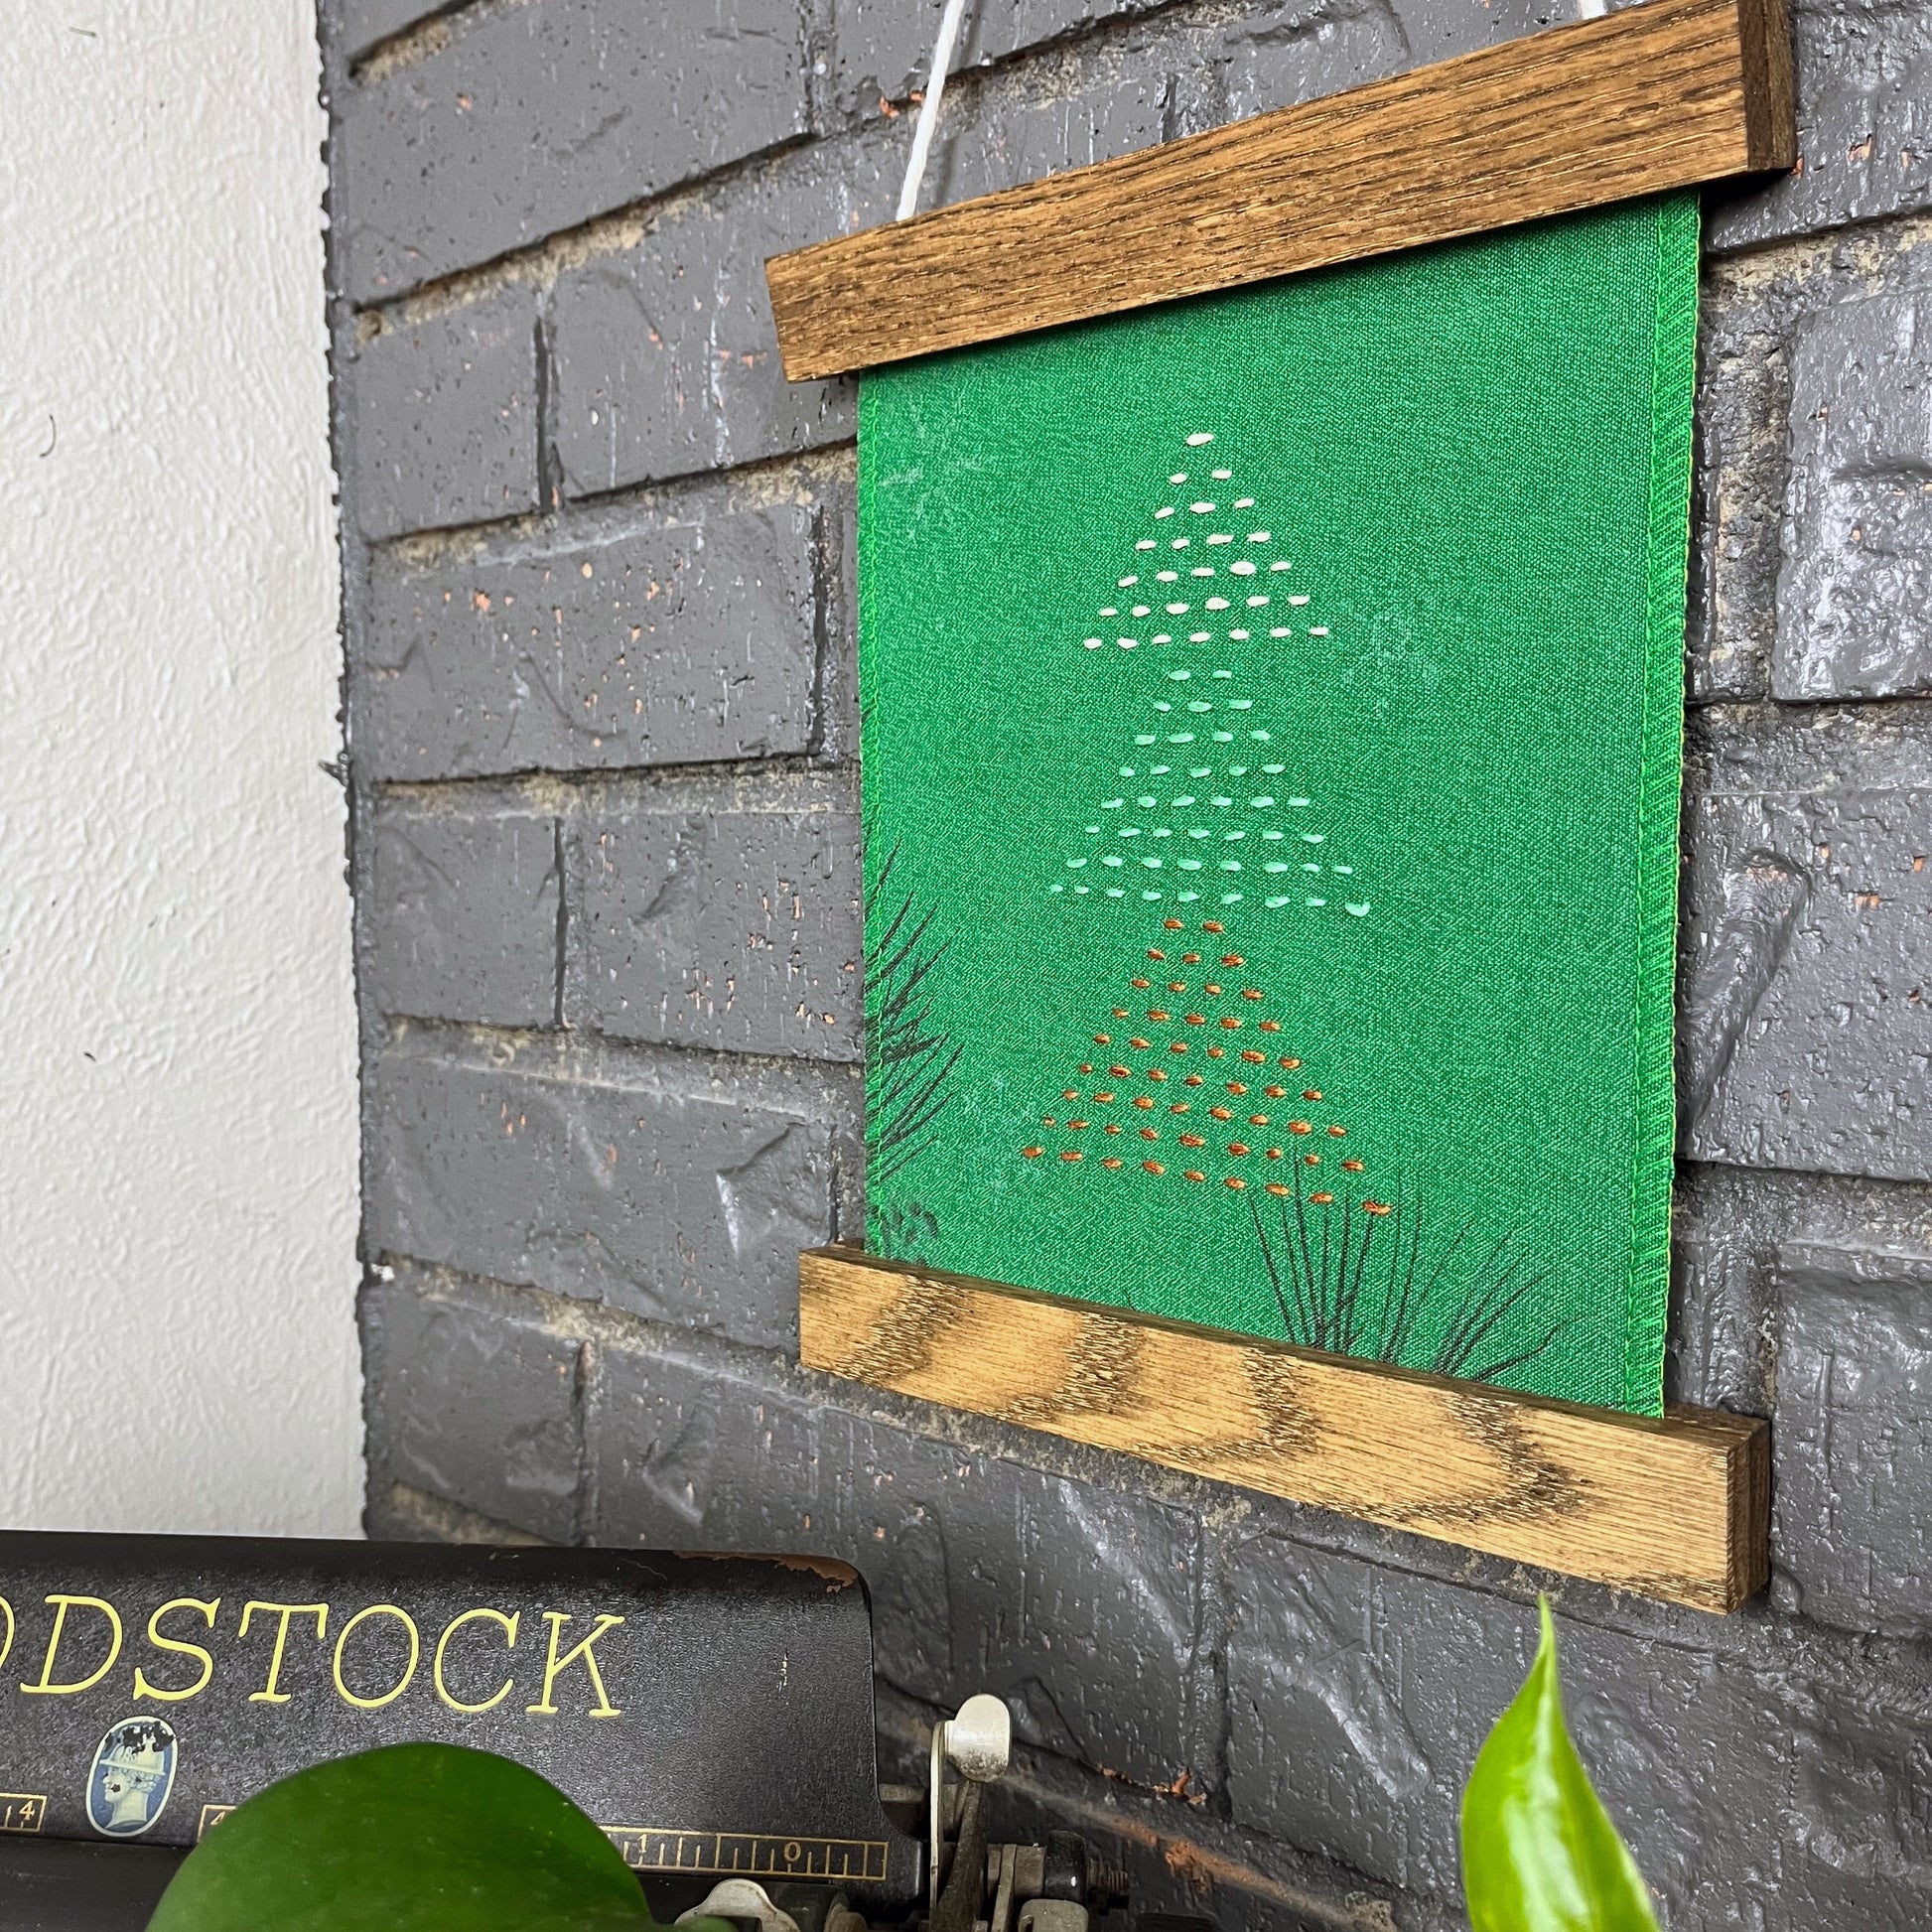 a fabric wall hanging in a magnetic wood frame, made from bright green fabric with pine branches printed on it, and stitched over with Christmas trees made from three triangles, each triangle made from running stitches in red green and peach